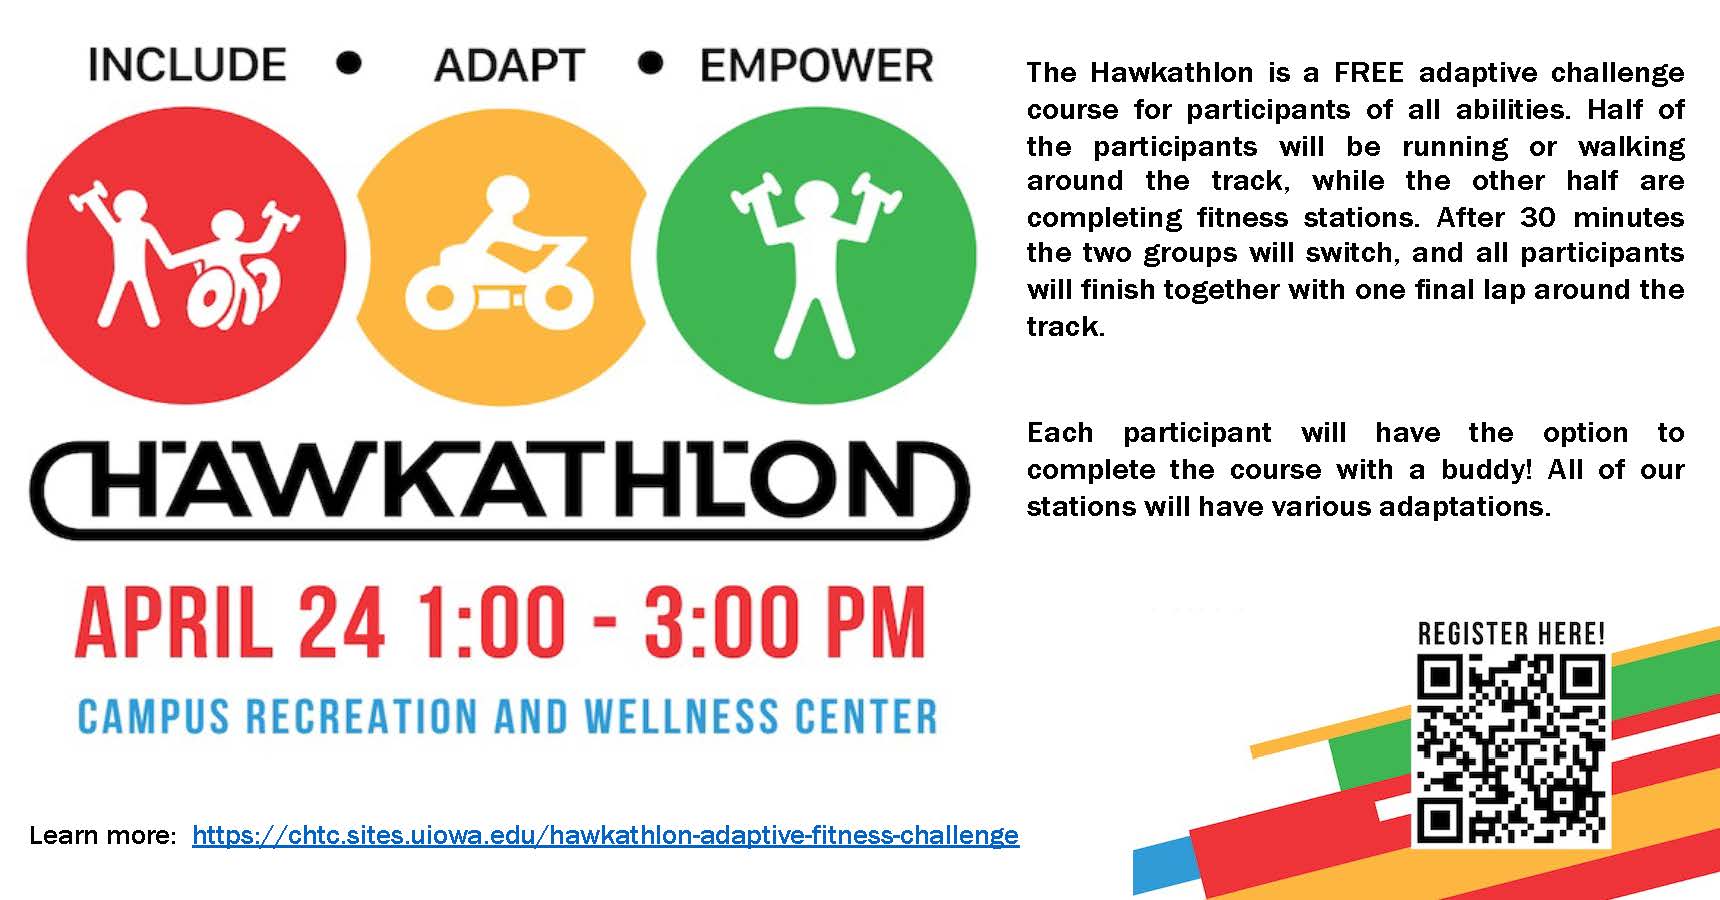 Hawkathon April 24 1:00-3:00pm Campus Recreation and Wellness Center. Free adaptive Challenge course for participants of all abilities. Half of the participants will be running or walking around the track, while the other half are completing fitness stations. After 30 minutes the two groups will switch, and all participants will finish together with one final lap around the track. 